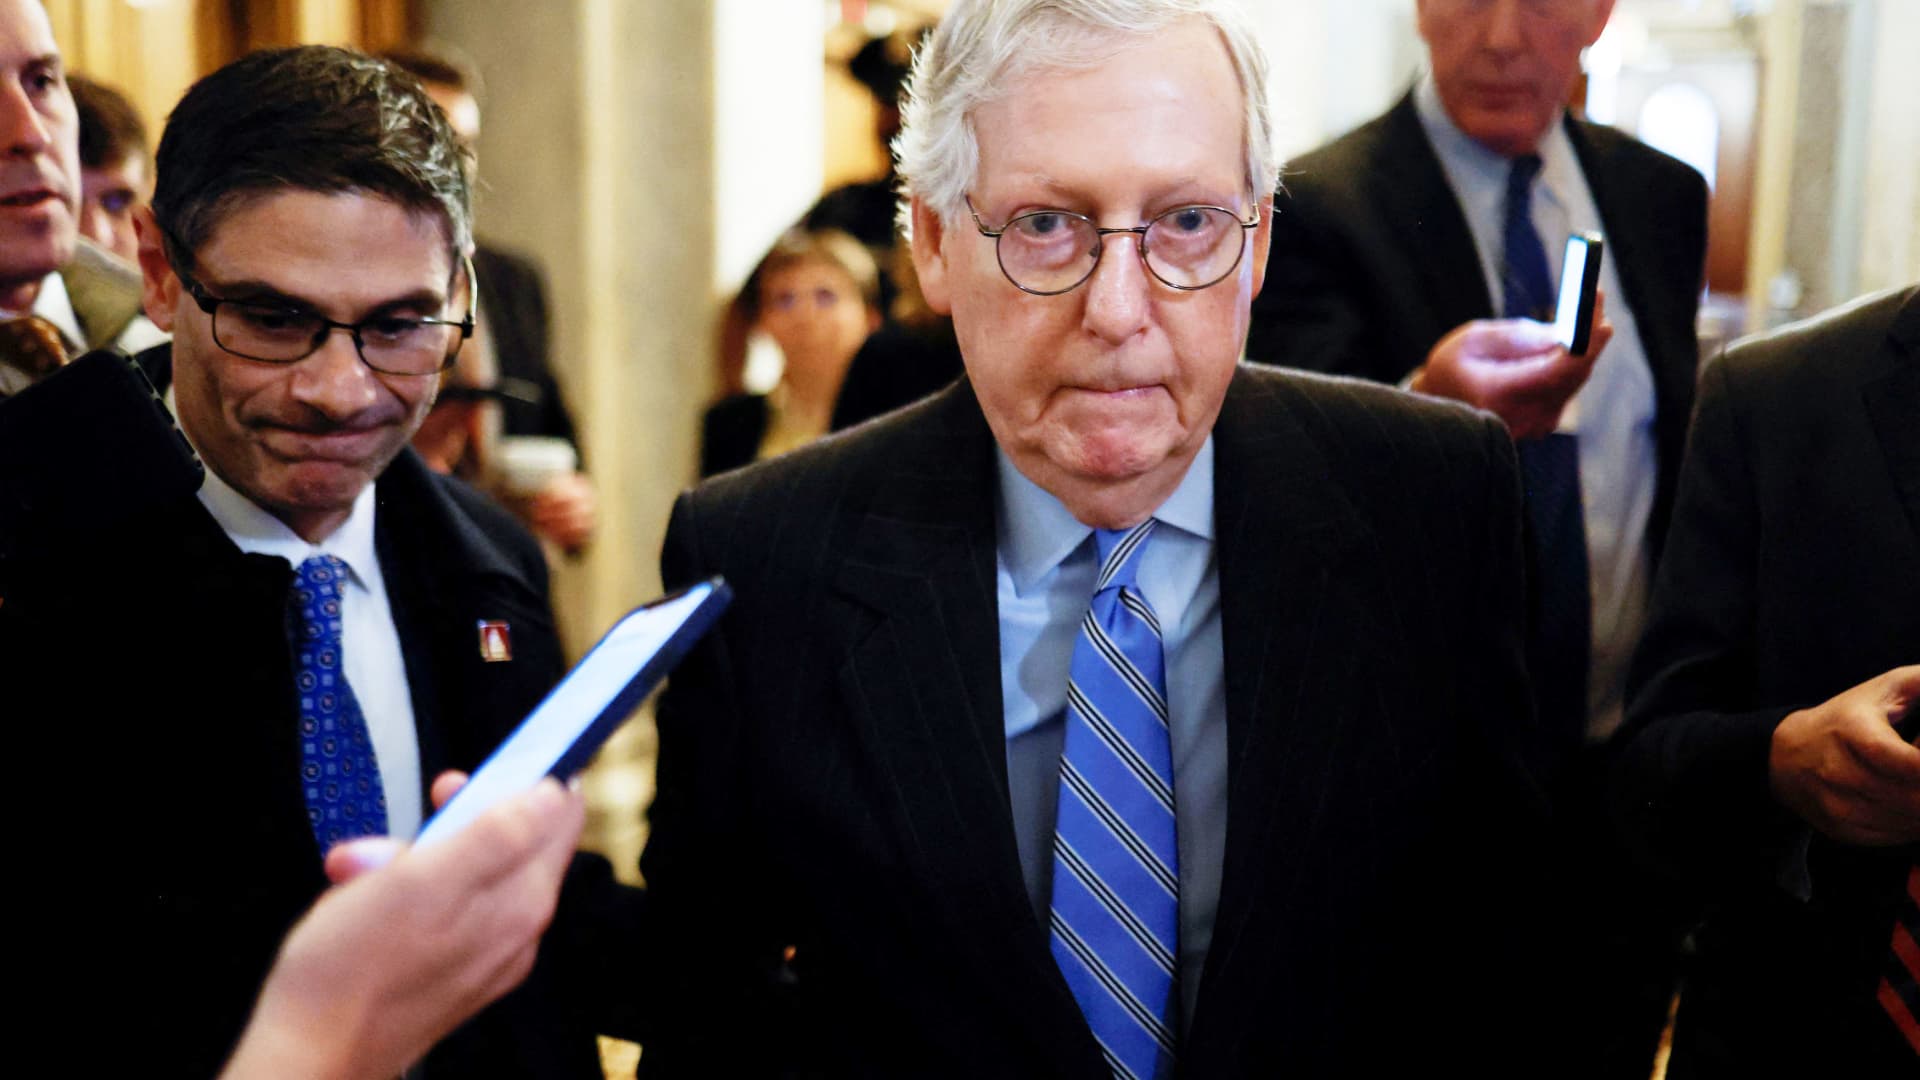 McConnell suggests Trump is 'highly unlikely' to win presidential election due to Ye, Fuentes dinner